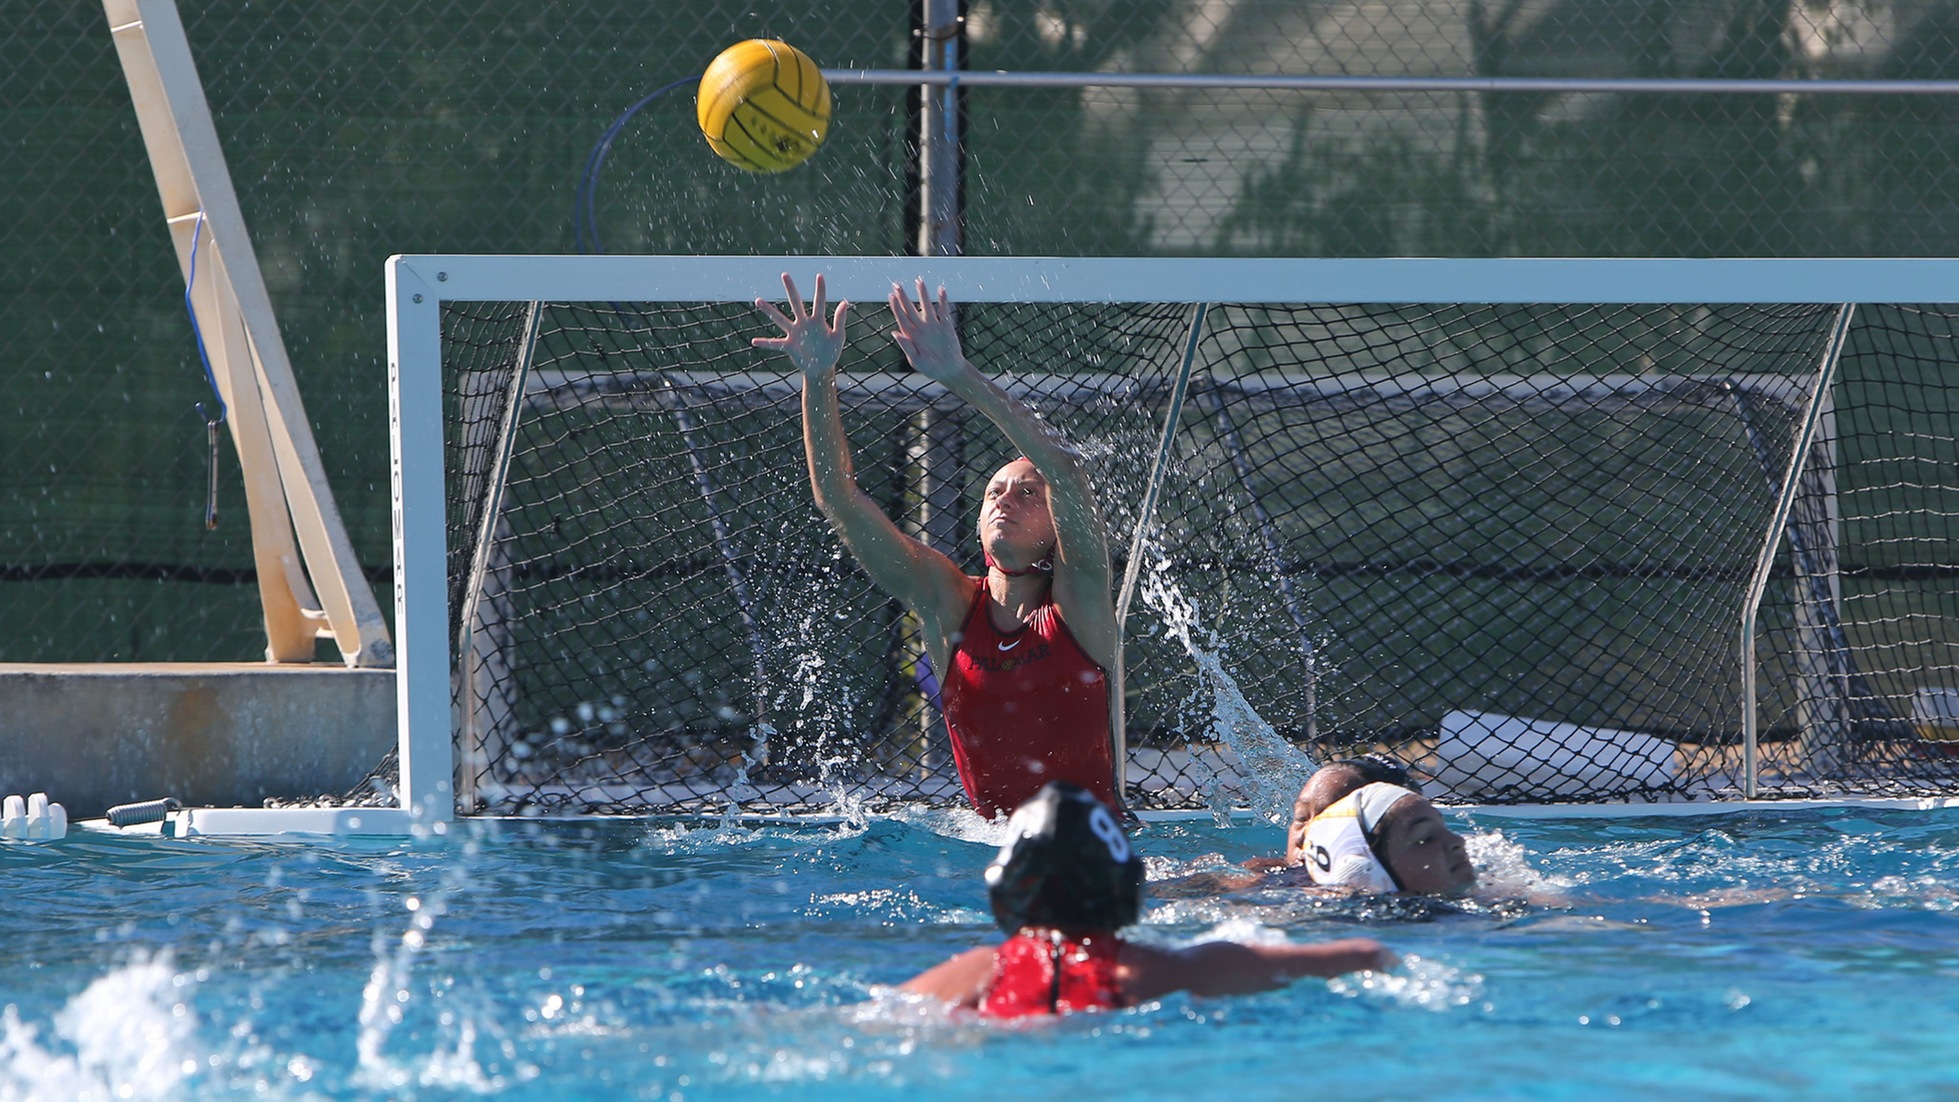 Julia Miller recorded 11 saves against East Los Angeles College on Saturday. Photo by Hugh Cox.